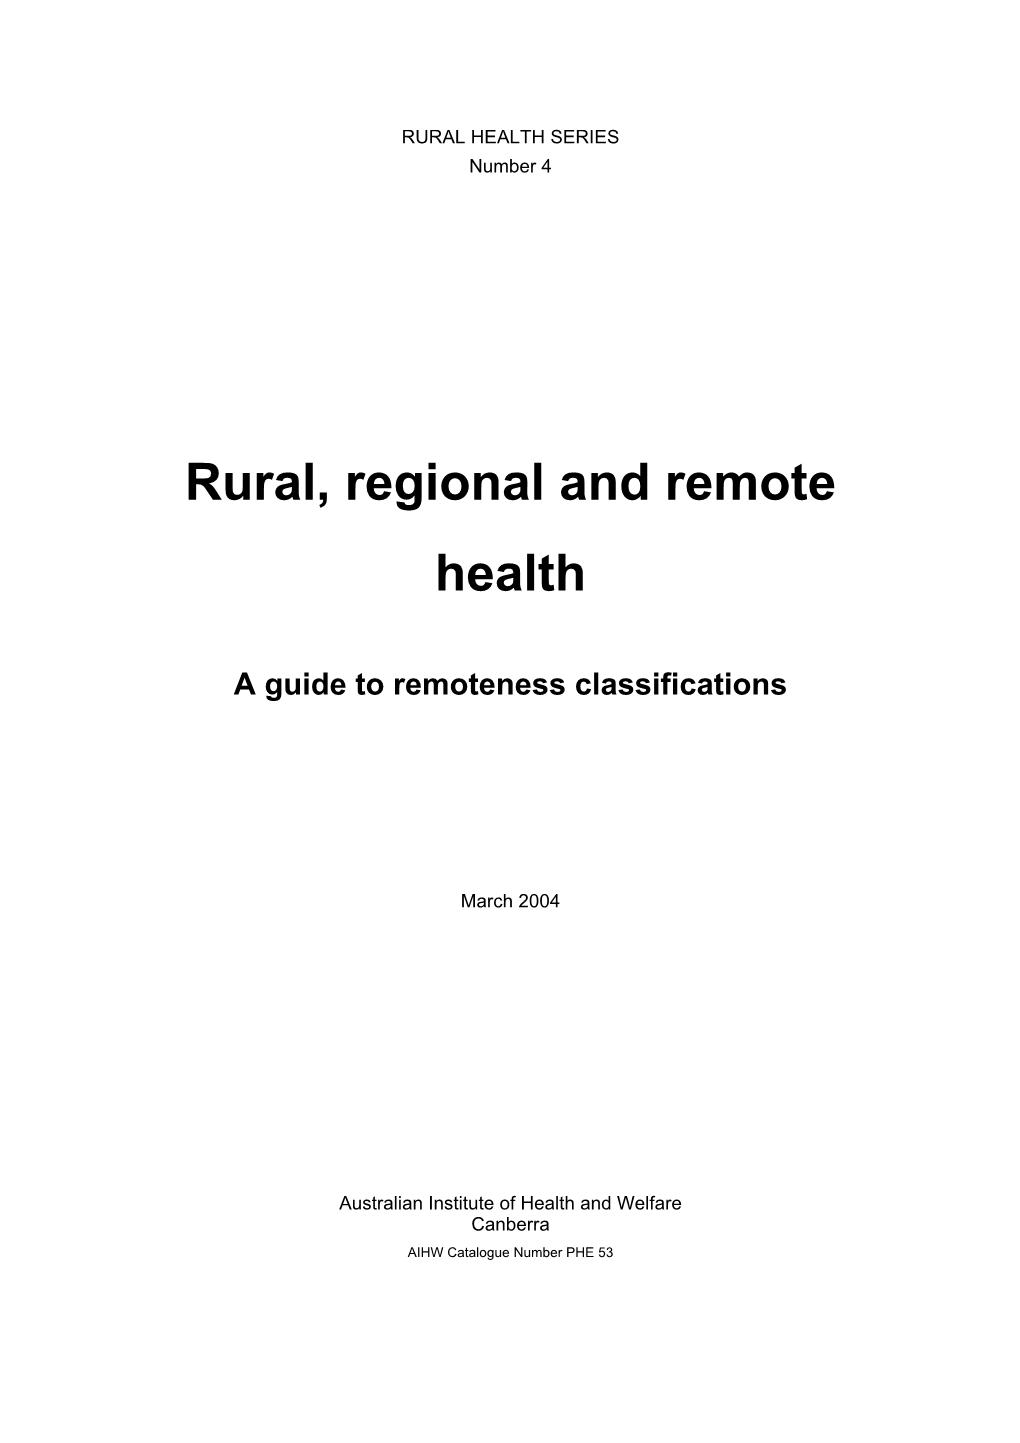 A Guide to Remoteness Classifications